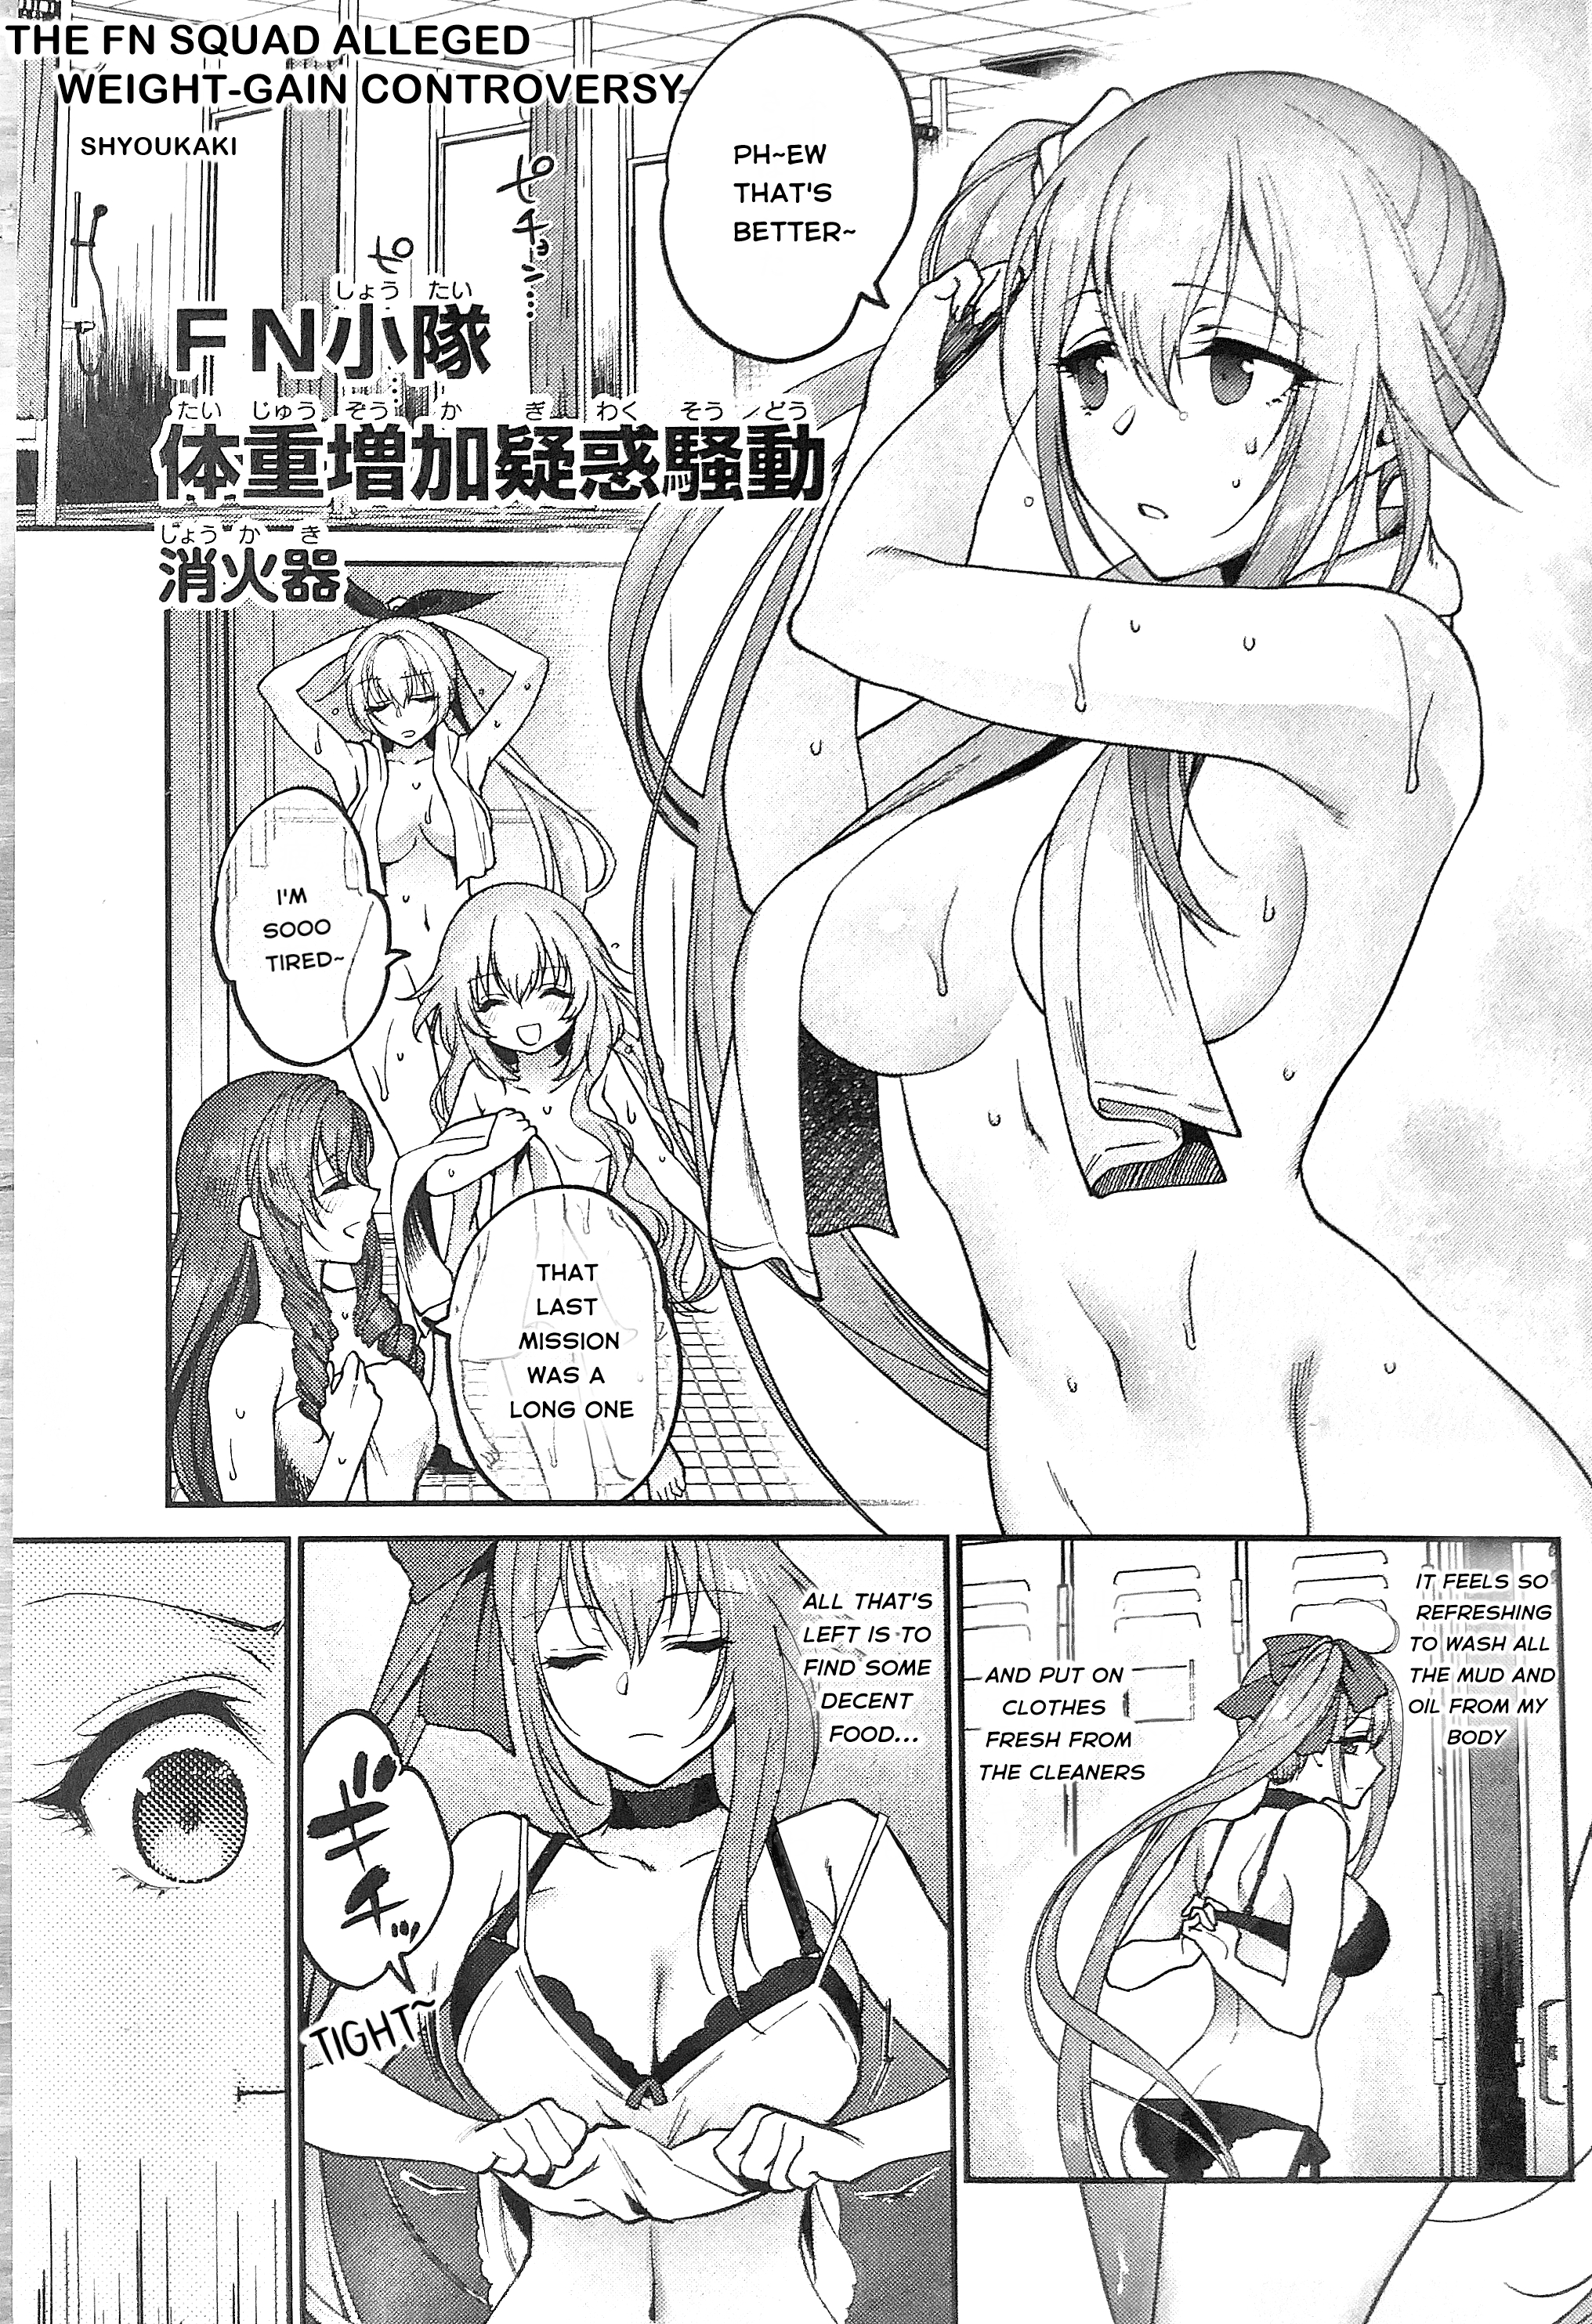 Dolls Frontline Comic Anthology - DNA Media 2019 - Chapter 17052 - The FN Squad Alleged Weight Gain Dispute - Image 1